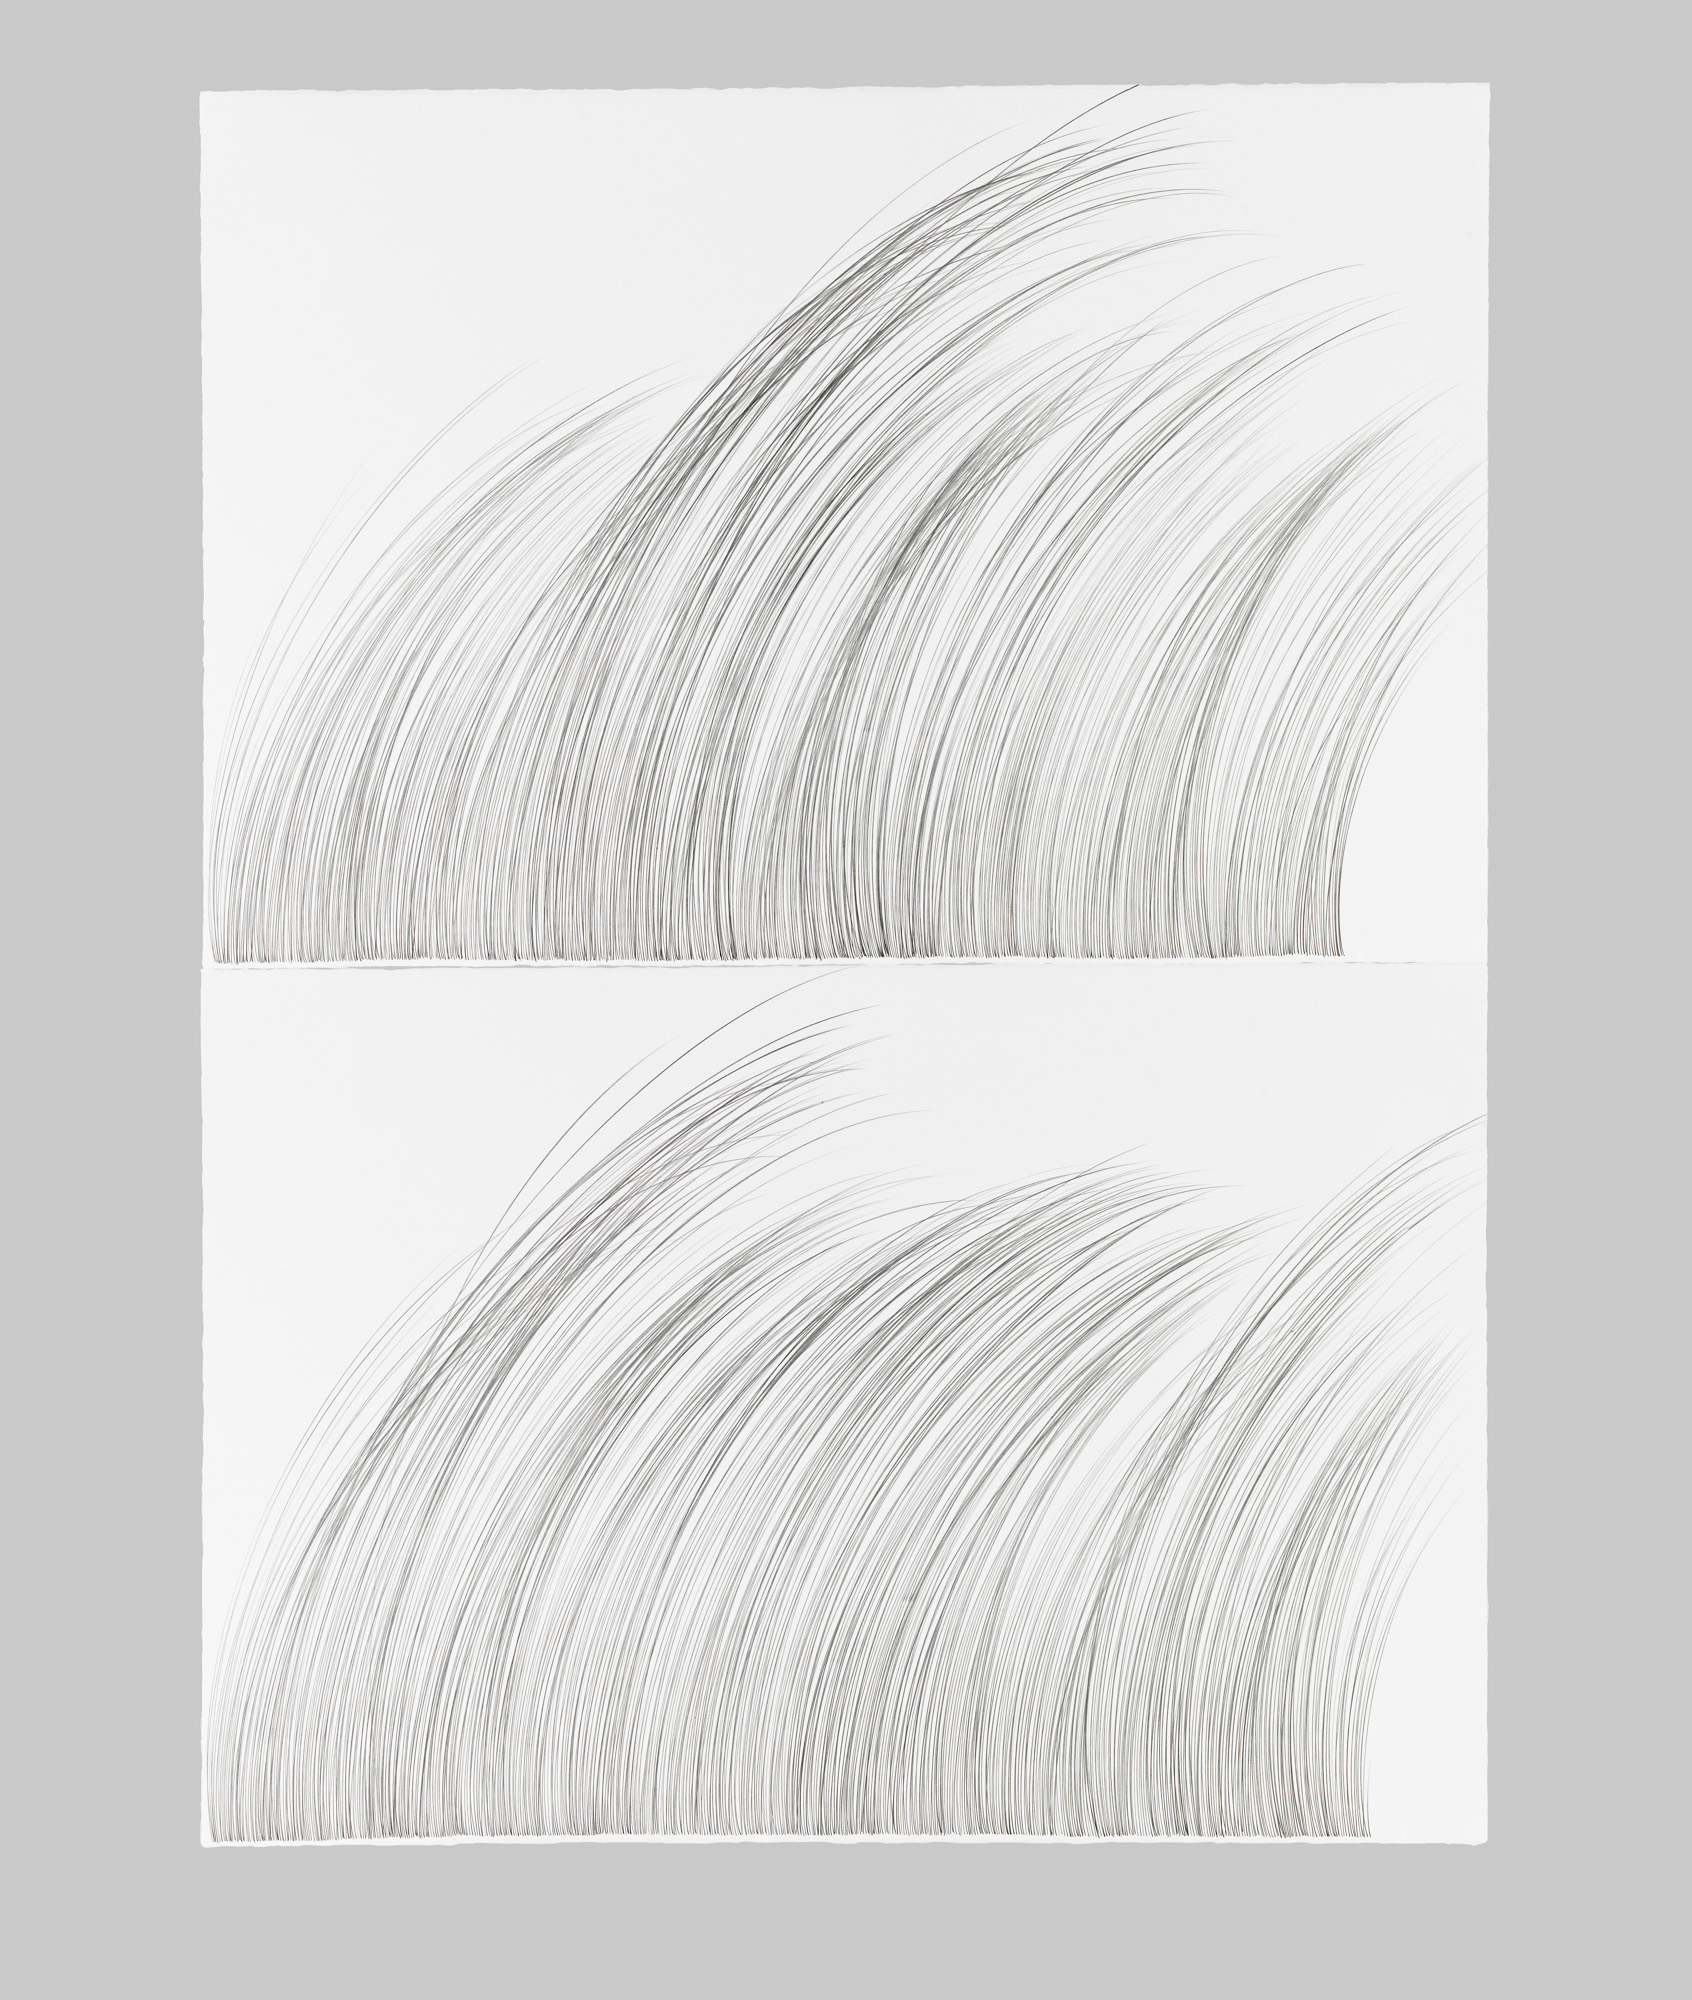 Large Grass   Graphite on cotton paper, 60 x 44 inches, diptych, 2015